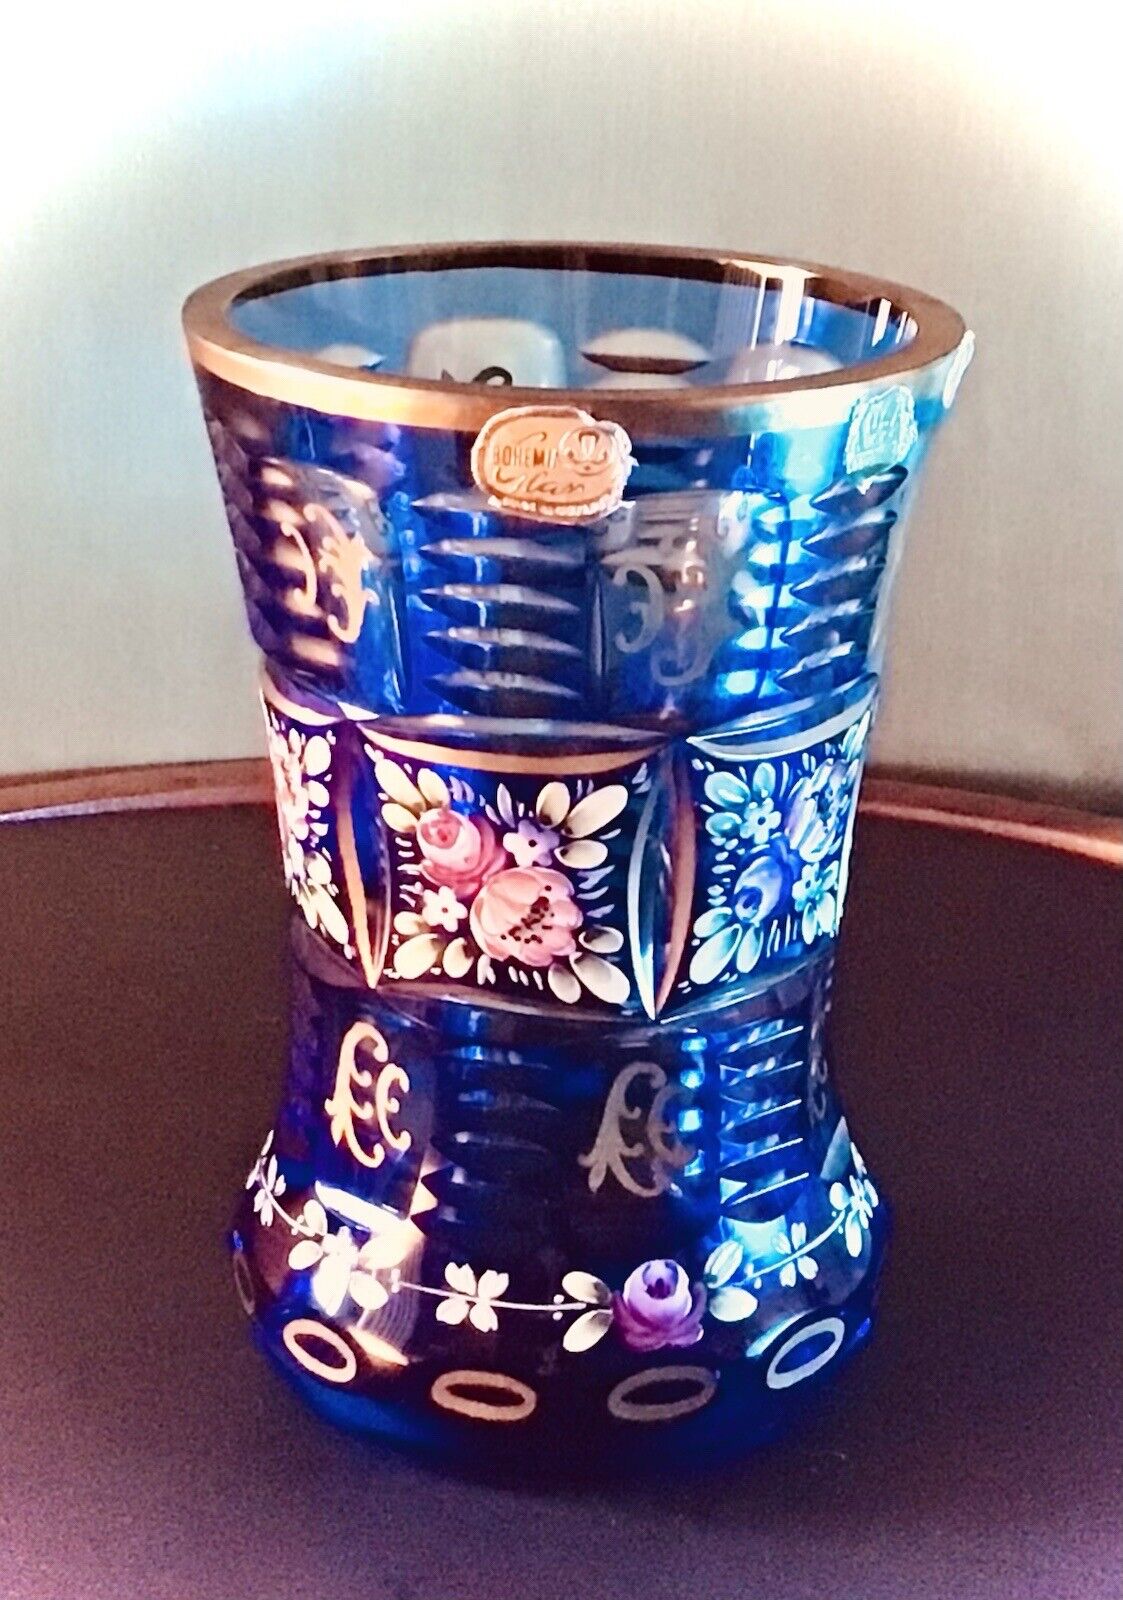 BOHEMIA CZECH COBALT BLUE CRYSTAL EARLY 19th CENTURY CUT ETCHED GOBLET 1950s ERA